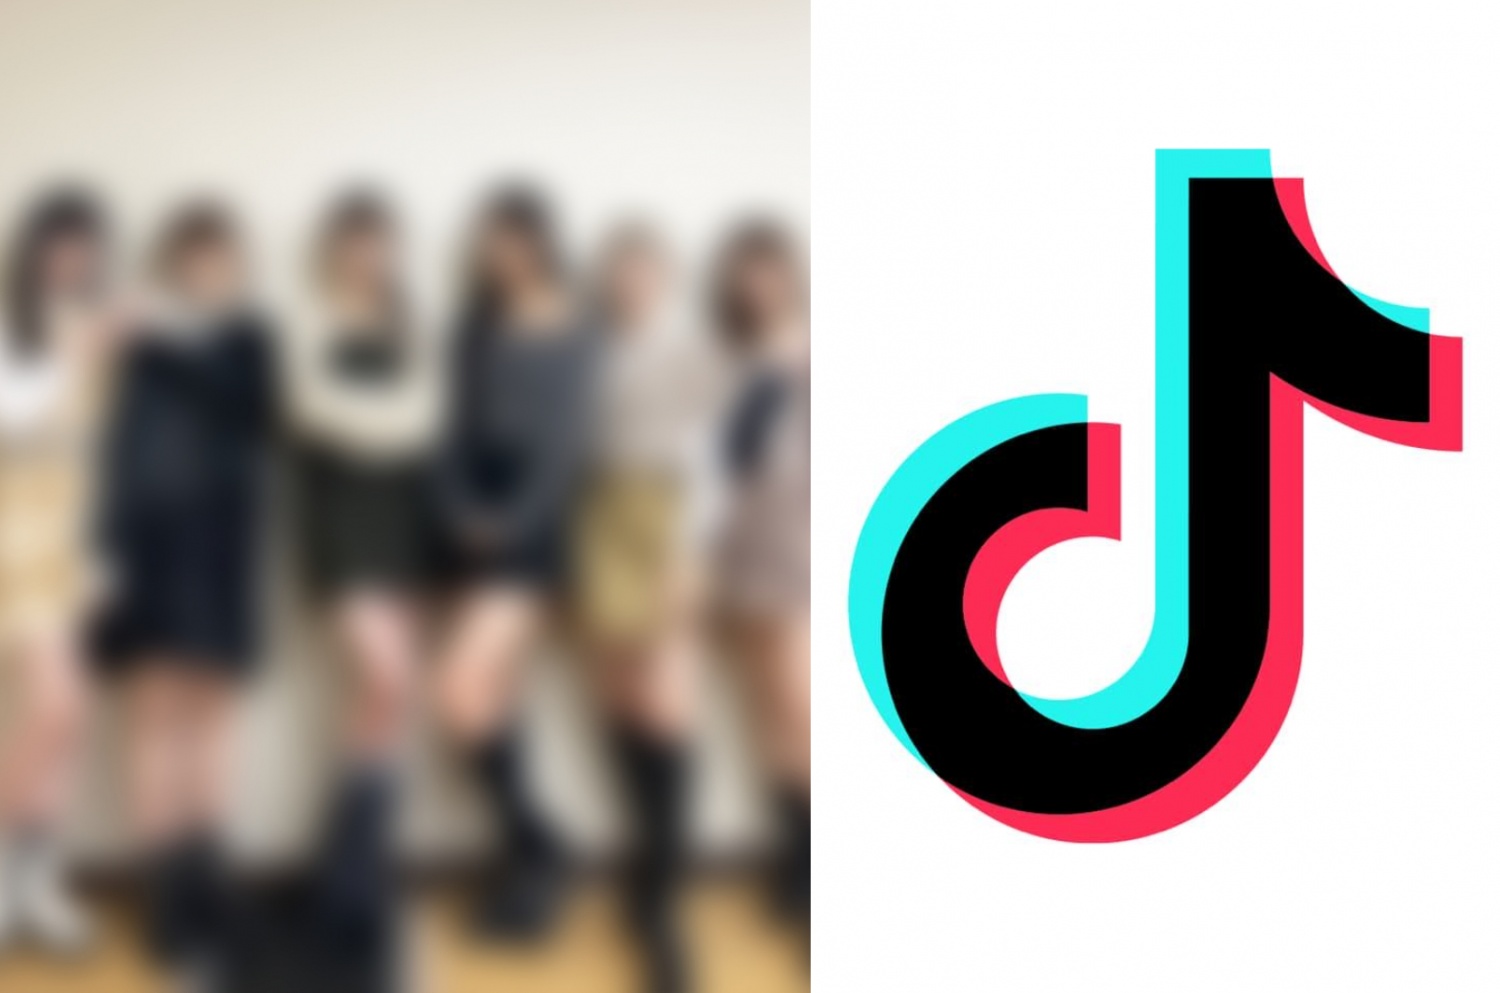 This K-pop Girl Group song is the most used music on TikTok in South Korea in 2022 + Top 10